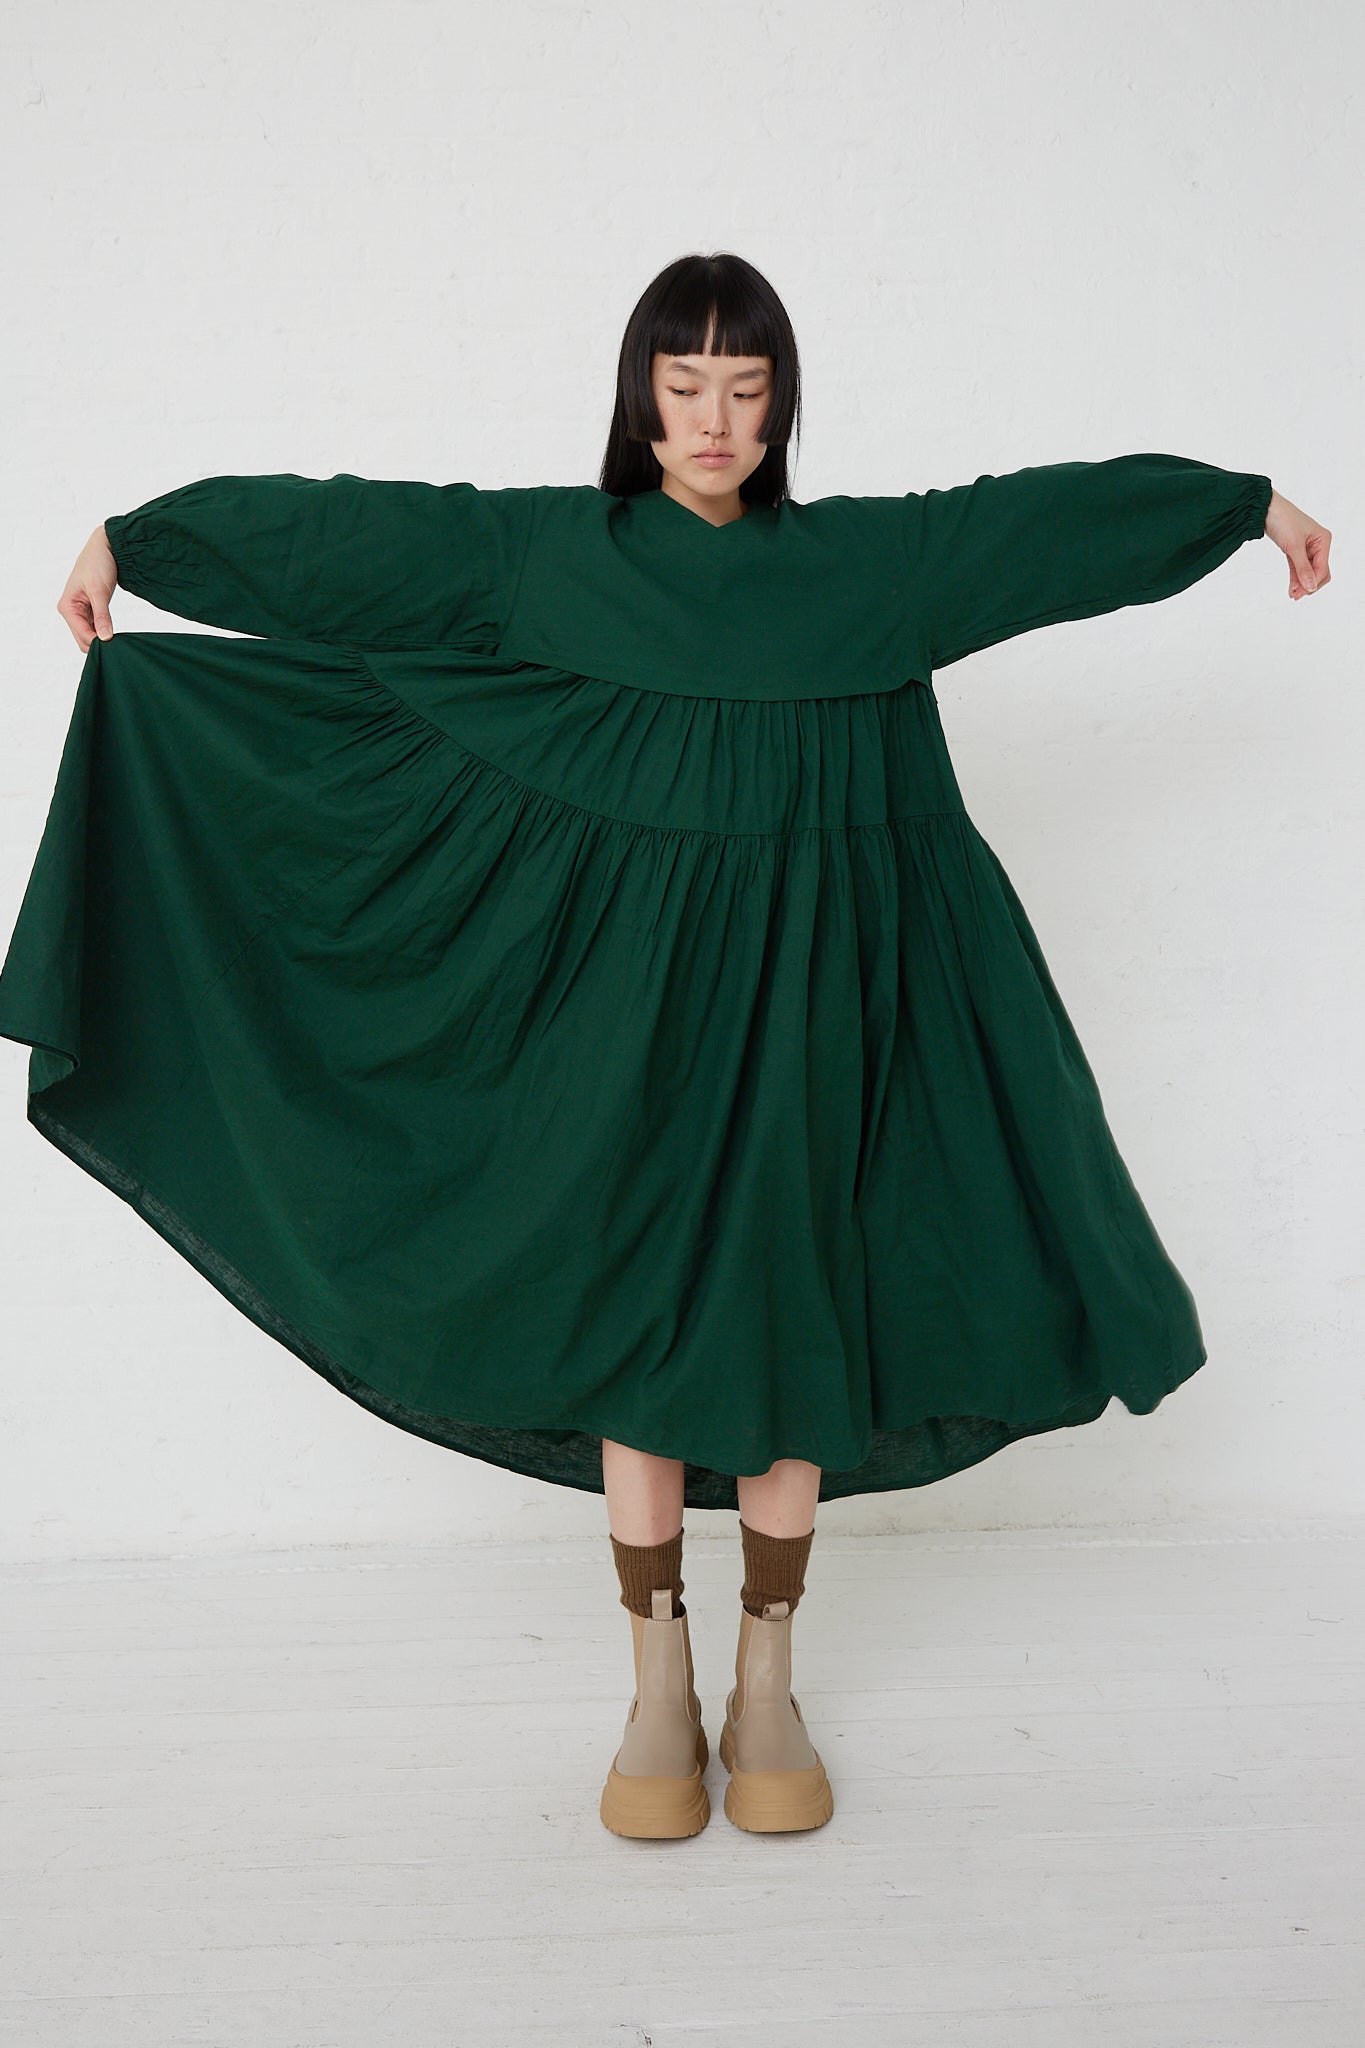 A woman in a UpcycleLino Linen Tiered Gather Dress in Green by nest Robe, made from upcycled linen and cotton blend fabric, is posing elegantly in front of a white wall.